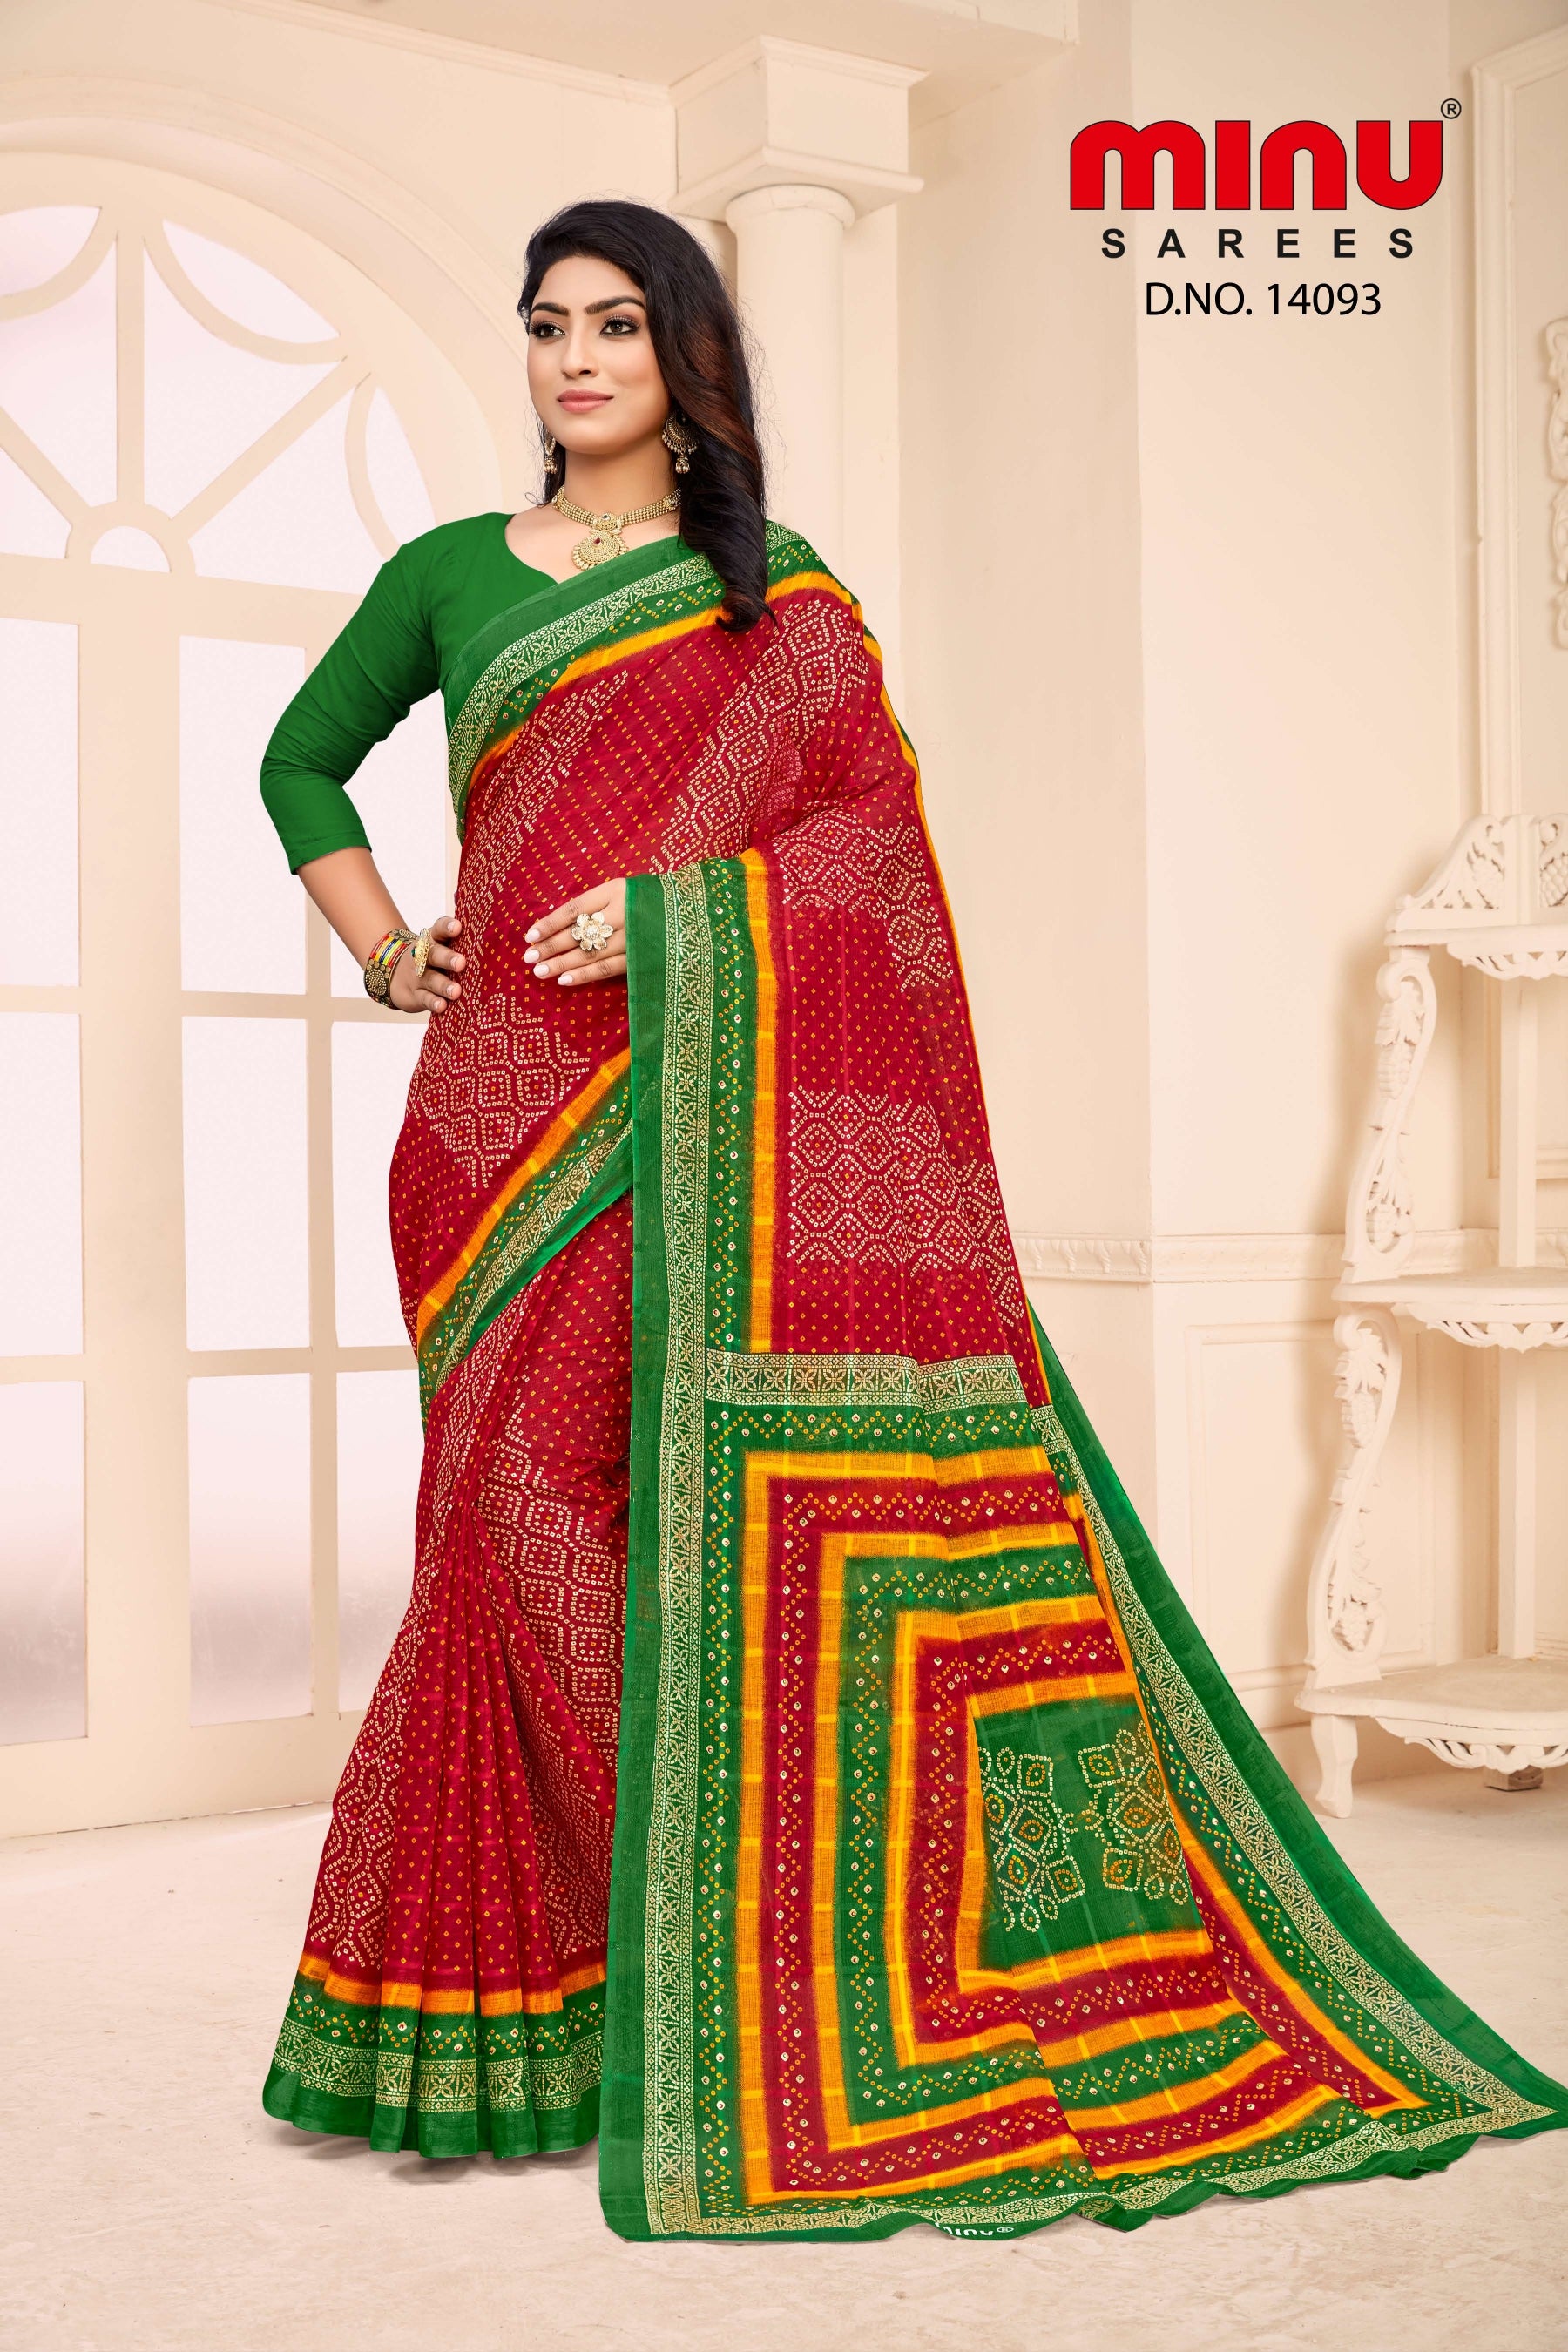 Multi-color printed extra classy saree wearing woman image